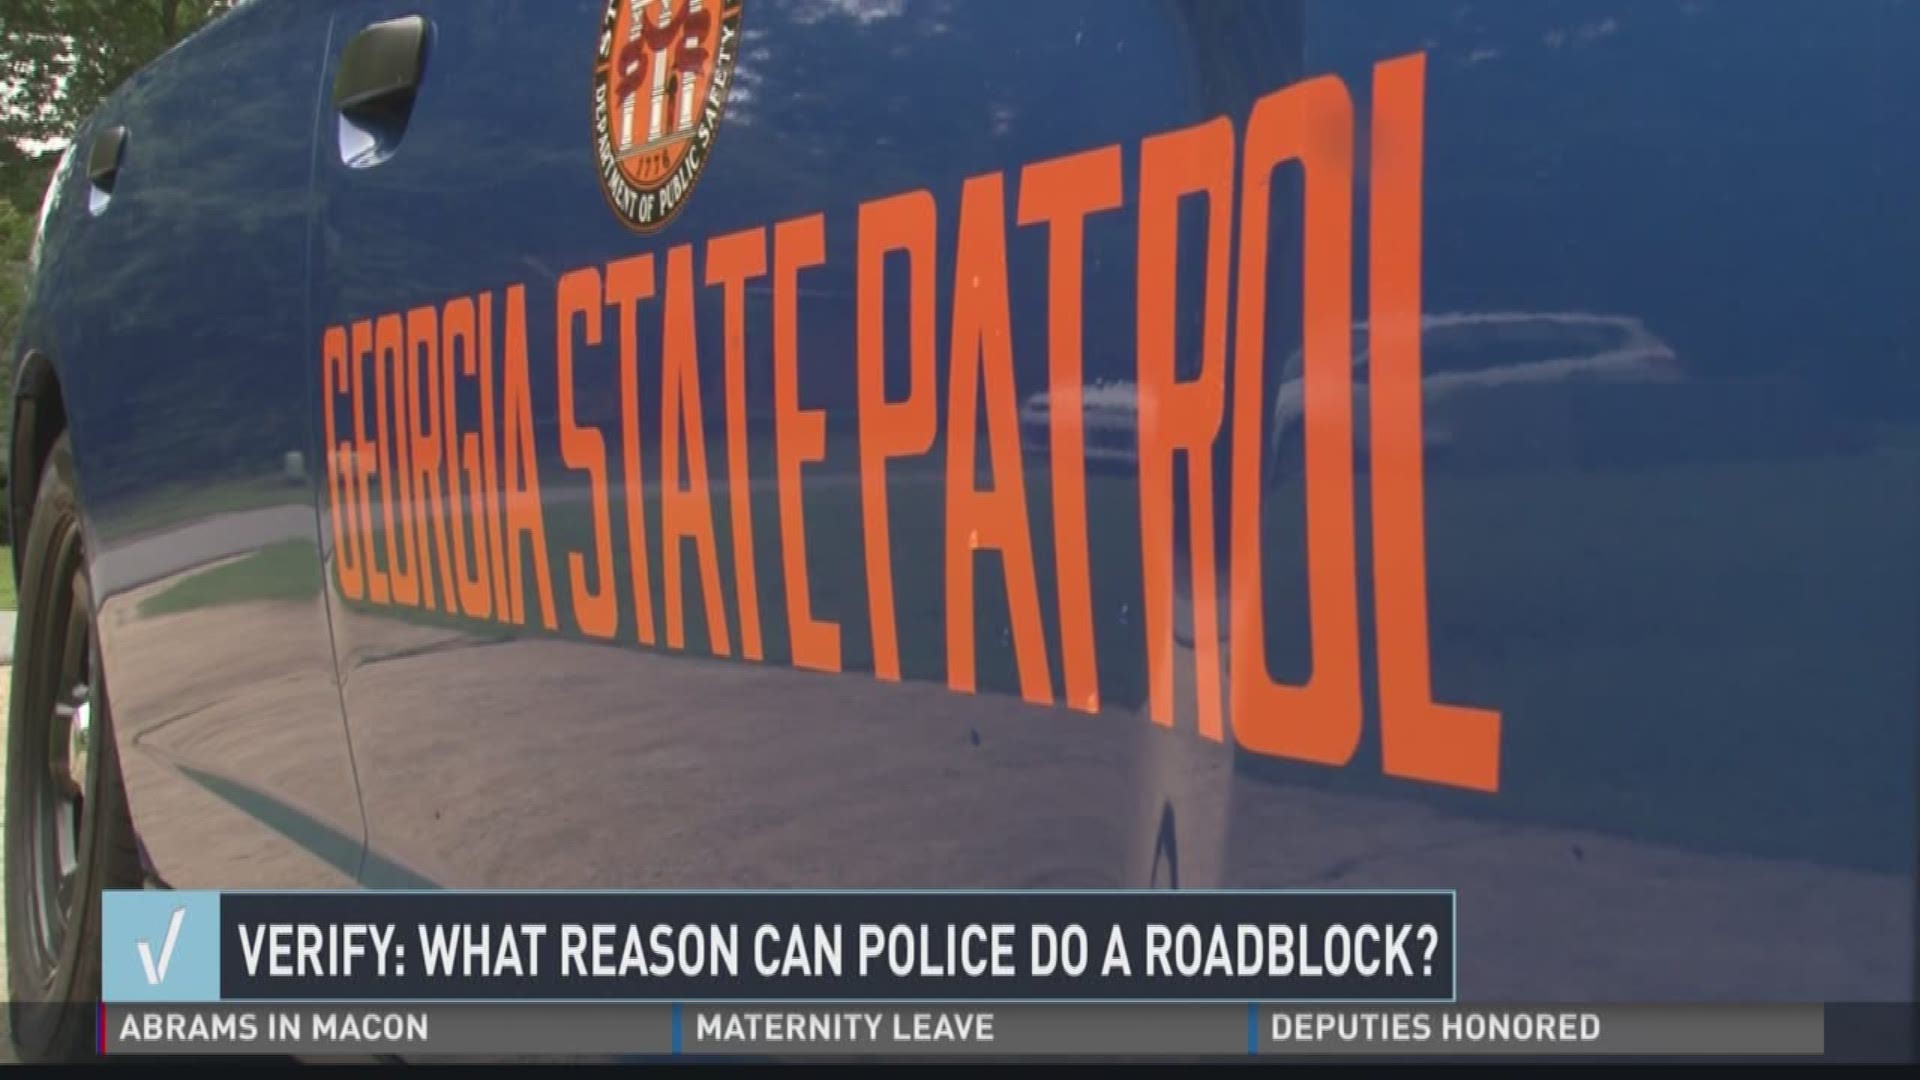 Verify: For what reasons can police do a roadblock?